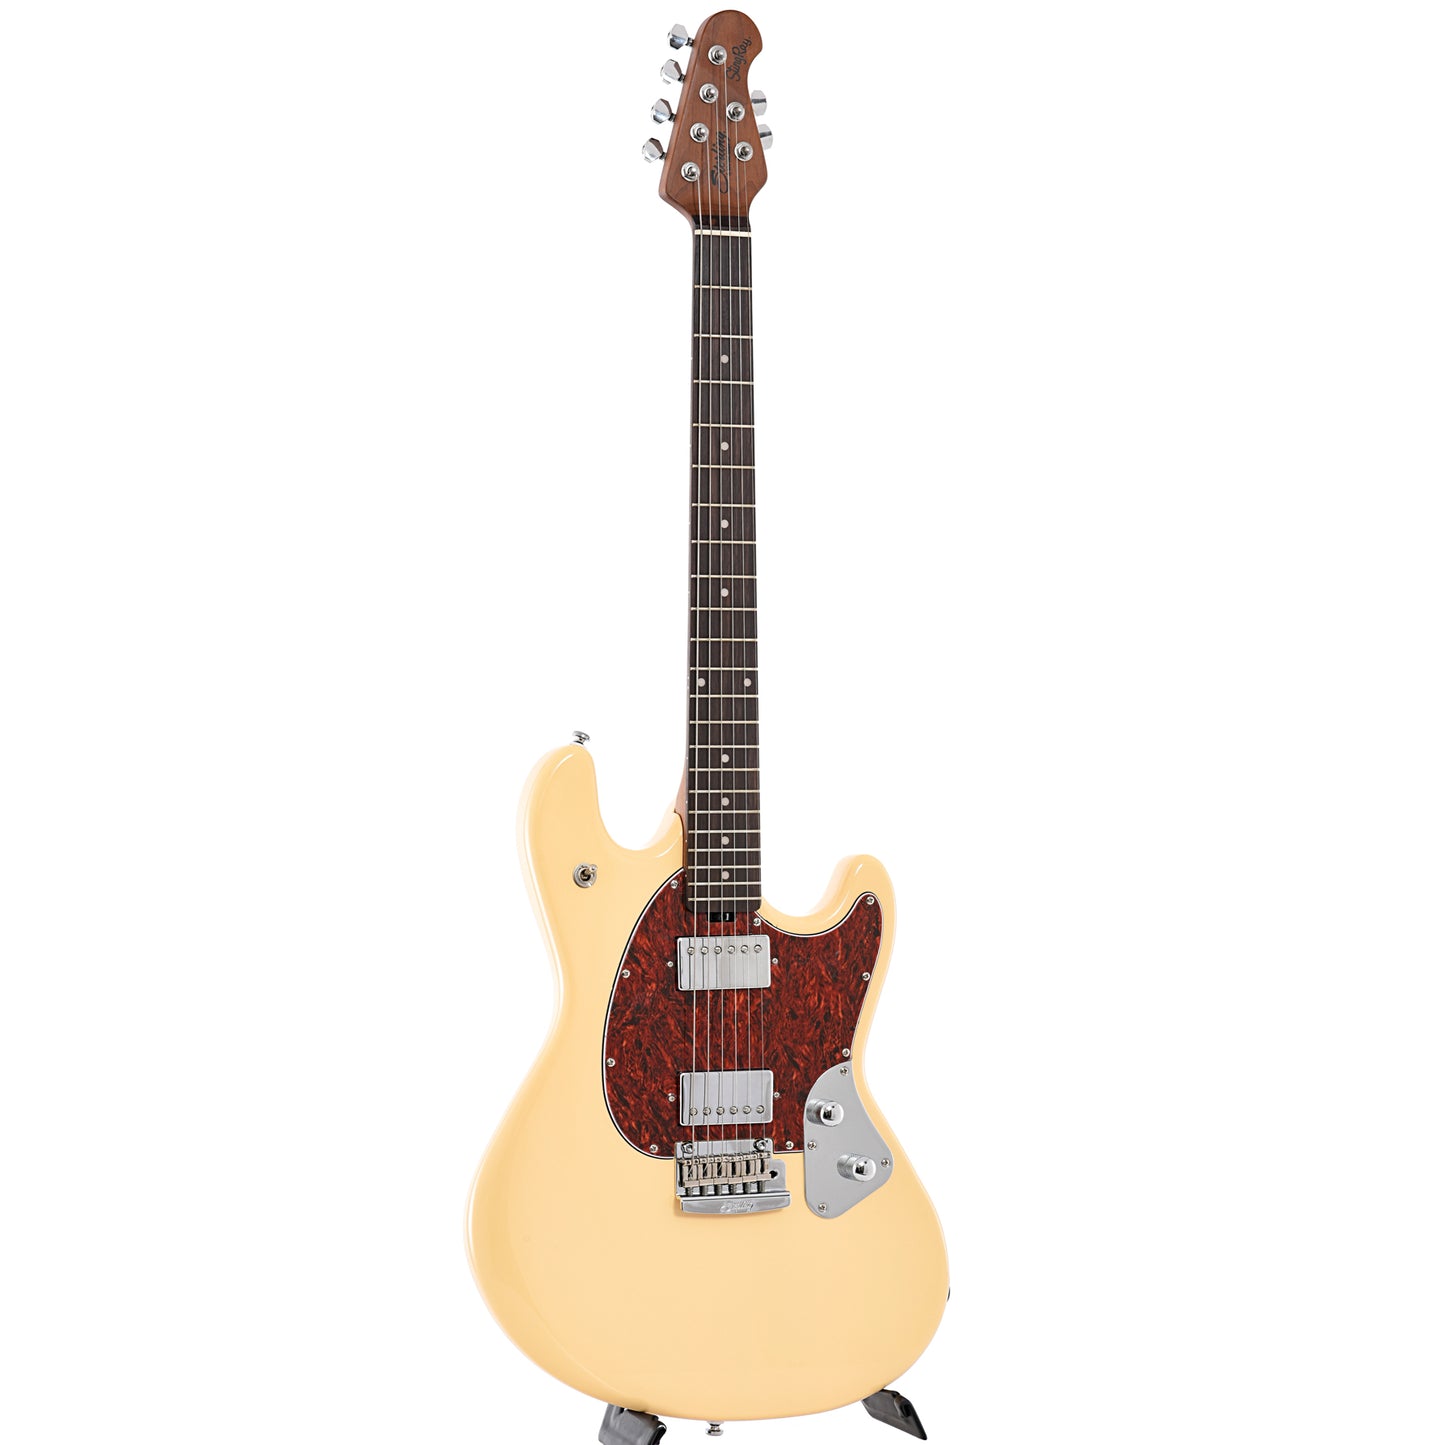 Image 11 of Sterling by Music Man Stingray SR50 Electric Guitar, Buttermilk- SKU# SR50-BM : Product Type Solid Body Electric Guitars : Elderly Instruments